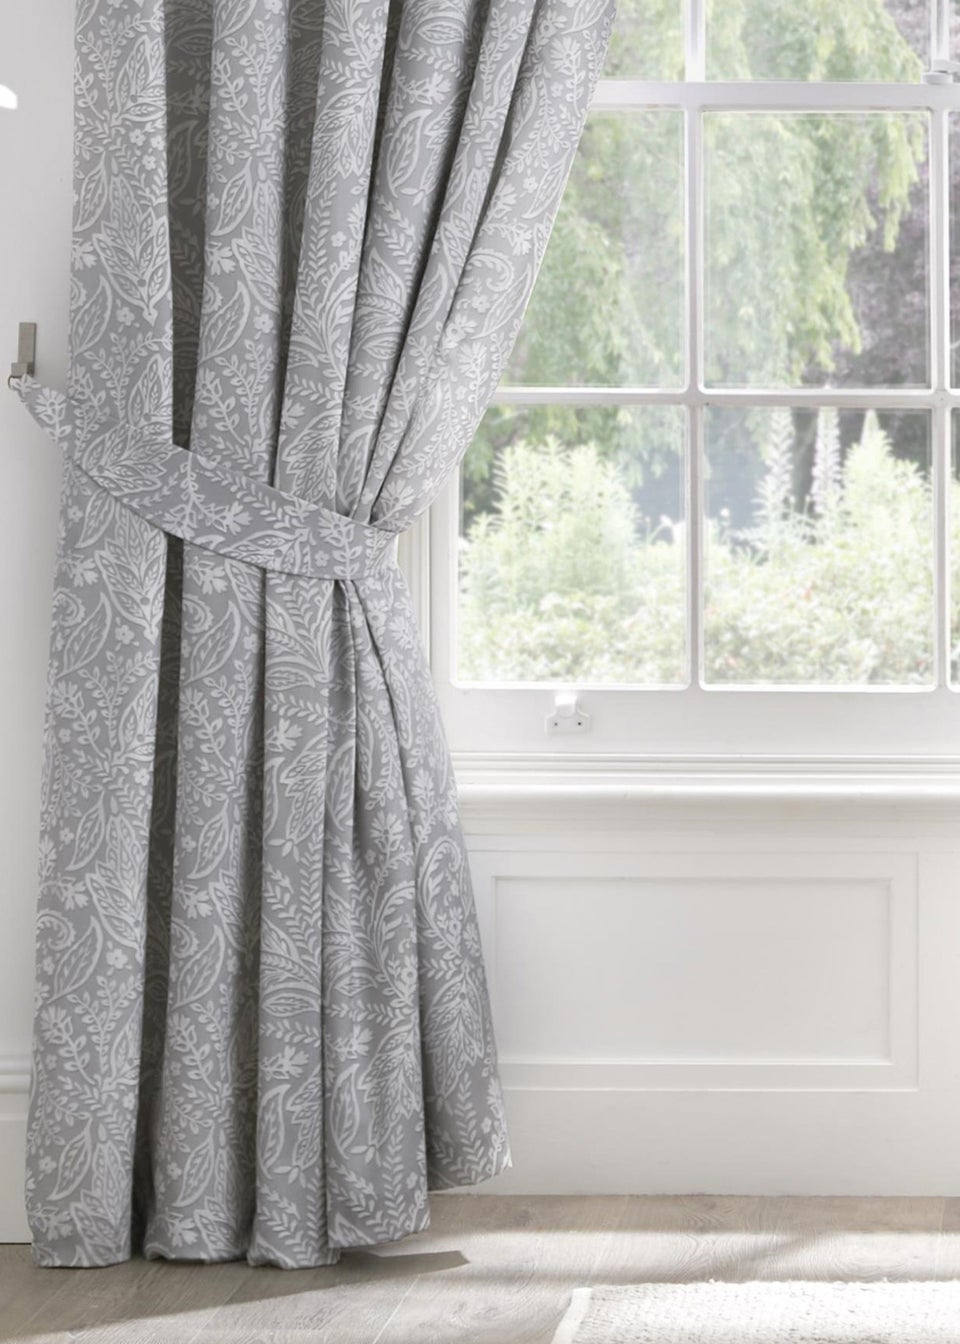 Dreams & Drapes Aveline Pencil Pleat Curtains With Tie-Backs